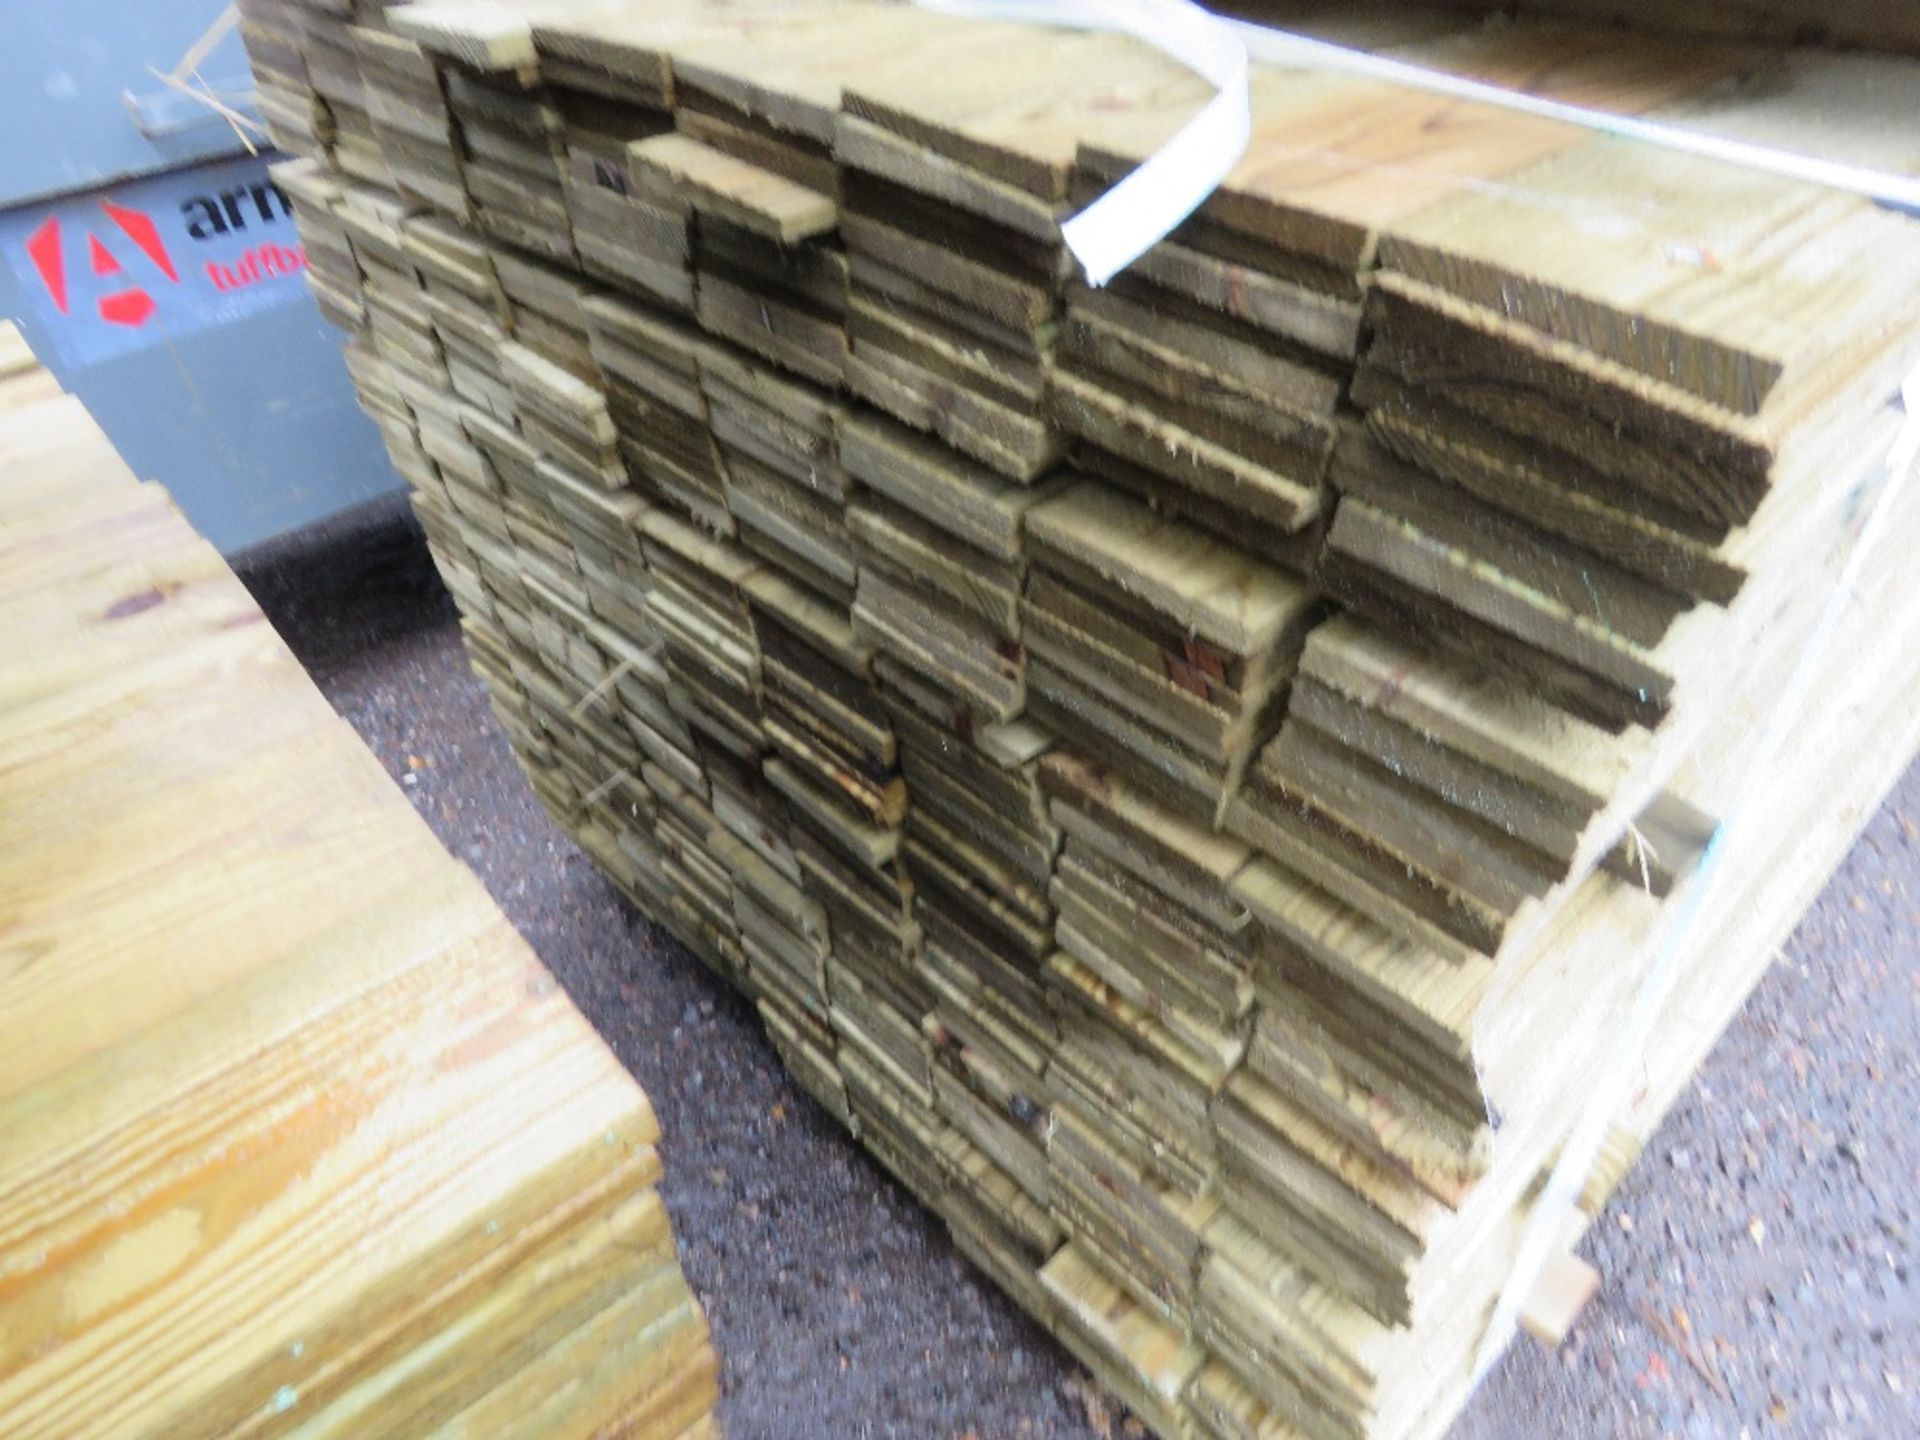 LARGE PACK OF TREATED FEATHER EDGE TIMBER CLADDING BOARDS MIXED LENGTHS 1.8M LENGTH X 100MM WIDTH AP - Image 3 of 4